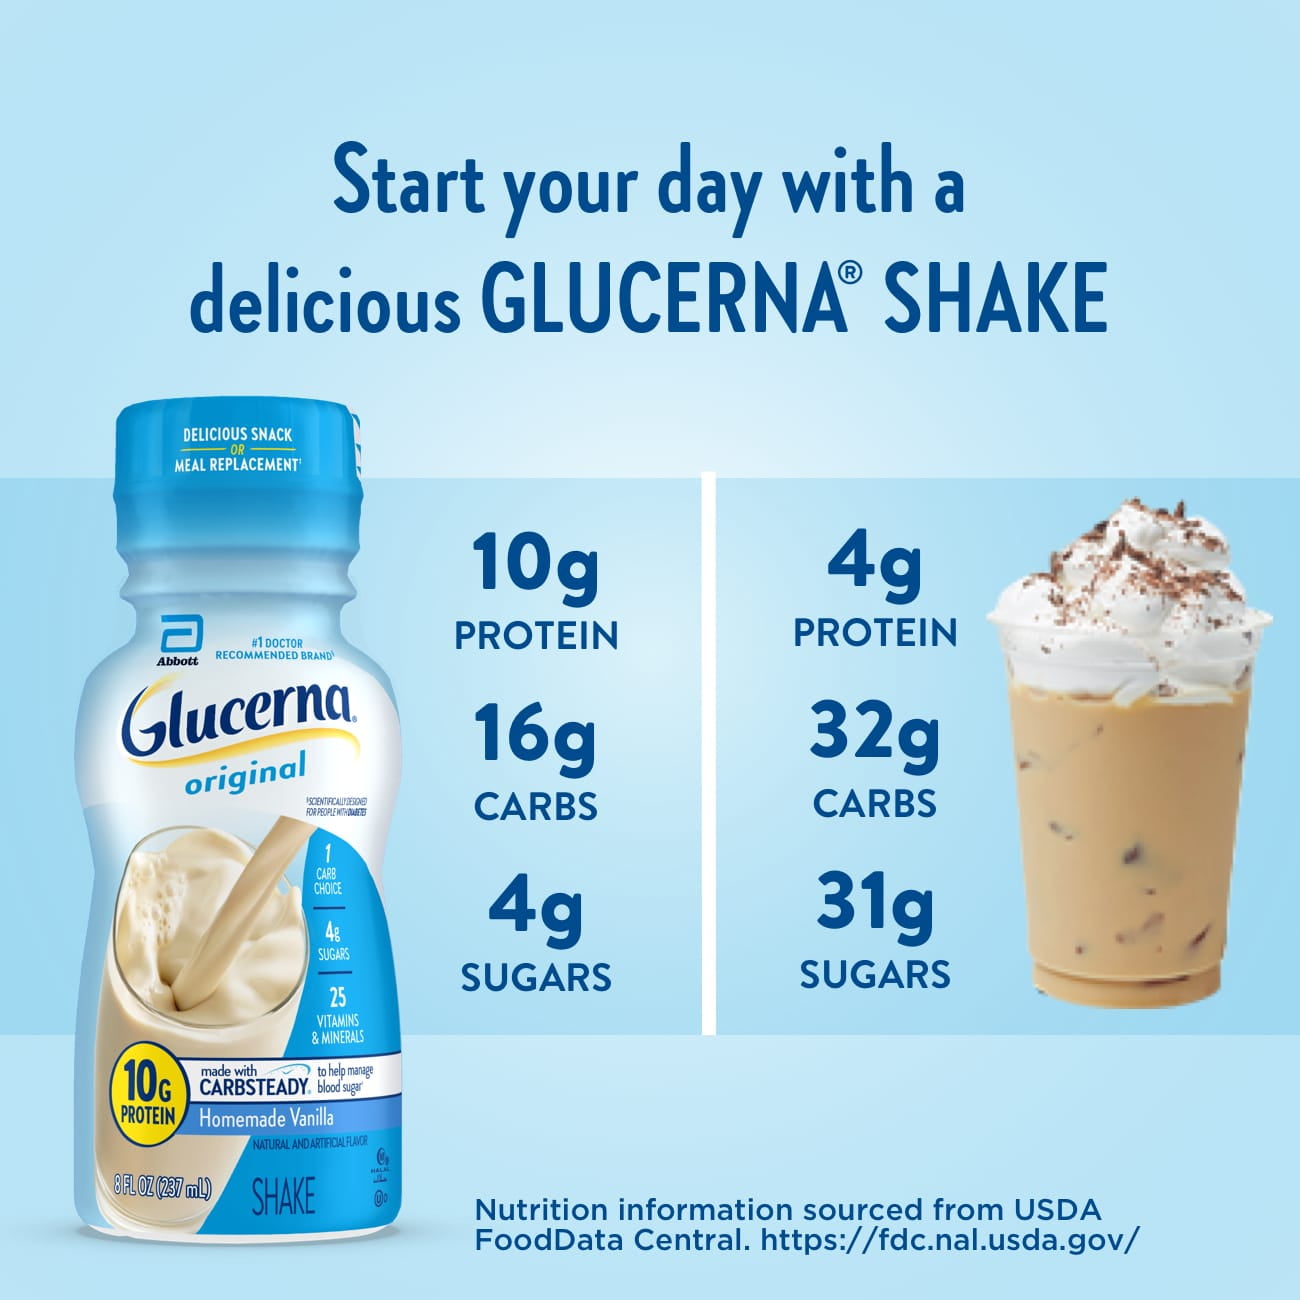 Glucerna Shake Ready-to-Drink Homemade Vanilla with Carb Steady 237mL Bottle